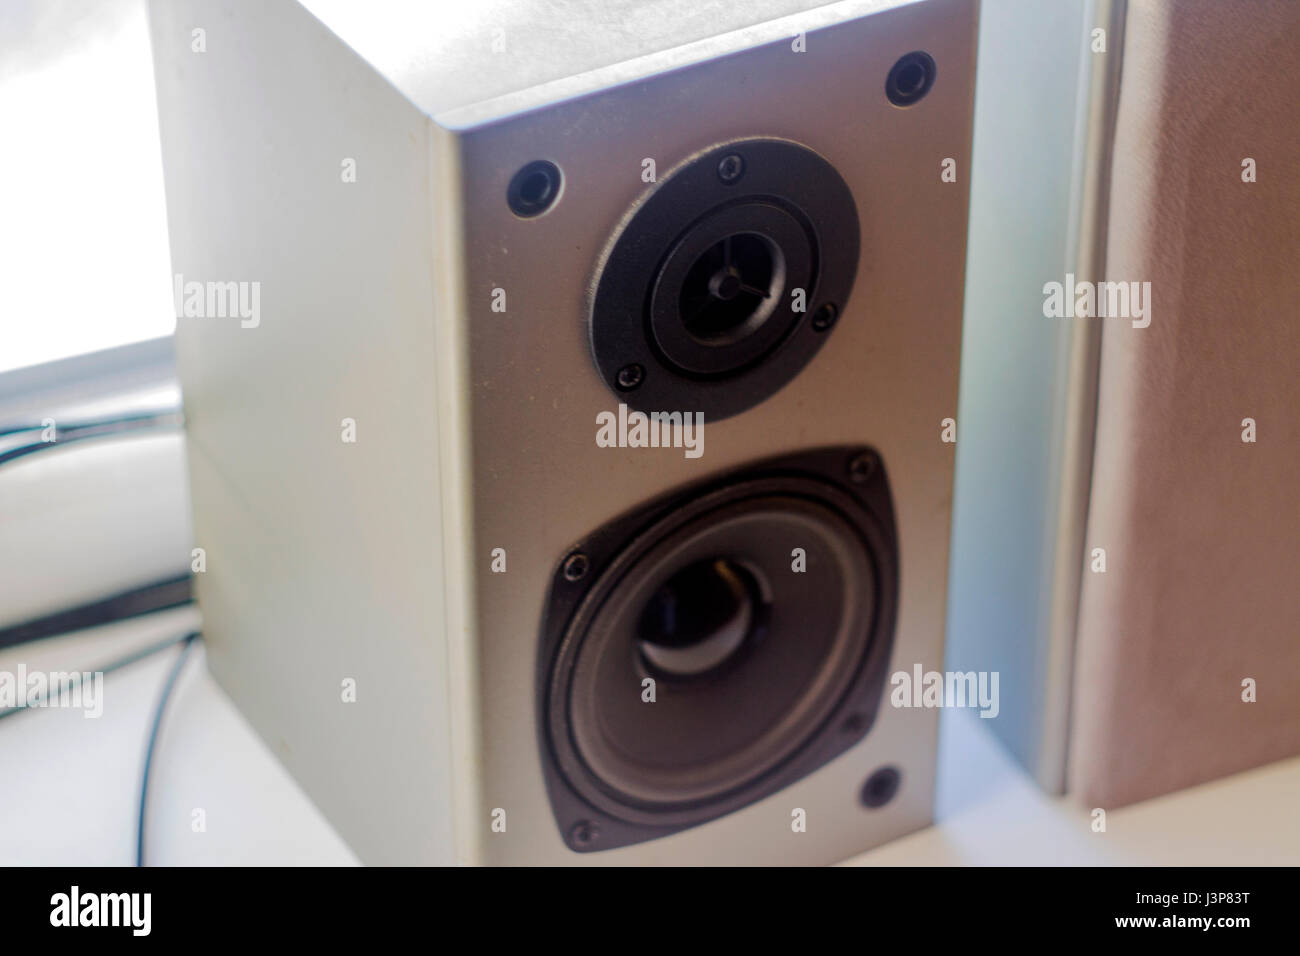 Audio system. Two gray speakers made of wood Stock Photo